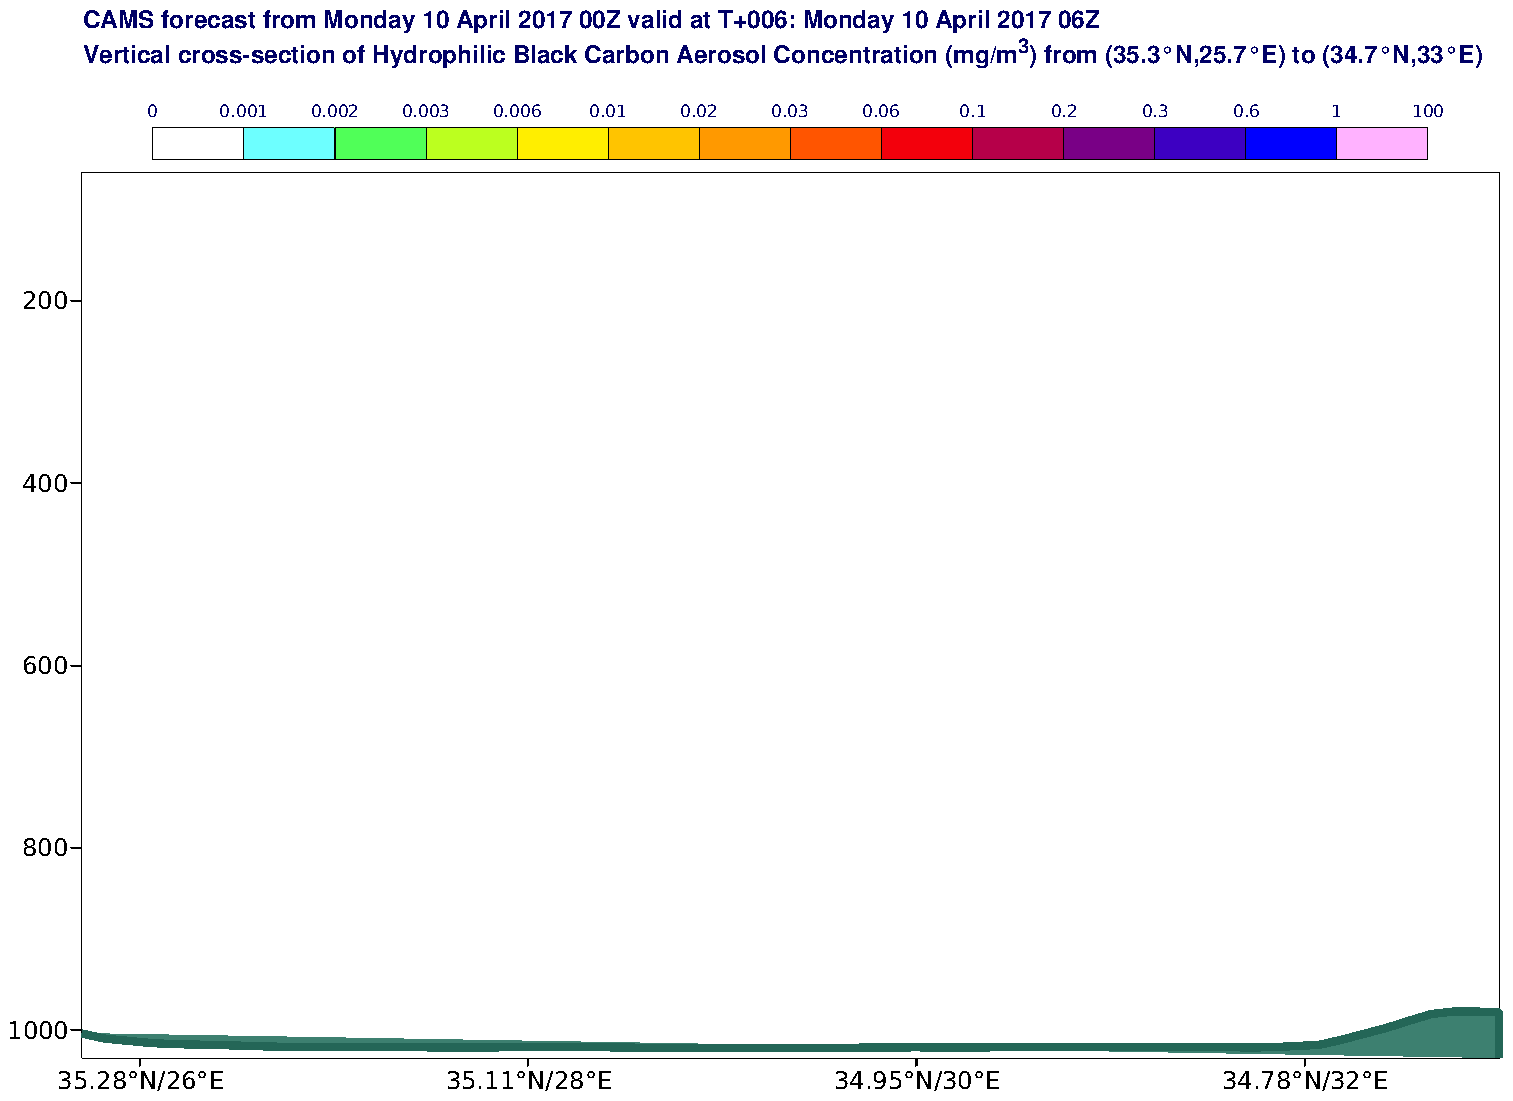 Vertical cross-section of Hydrophilic Black Carbon Aerosol Concentration (mg/m3) valid at T6 - 2017-04-10 06:00